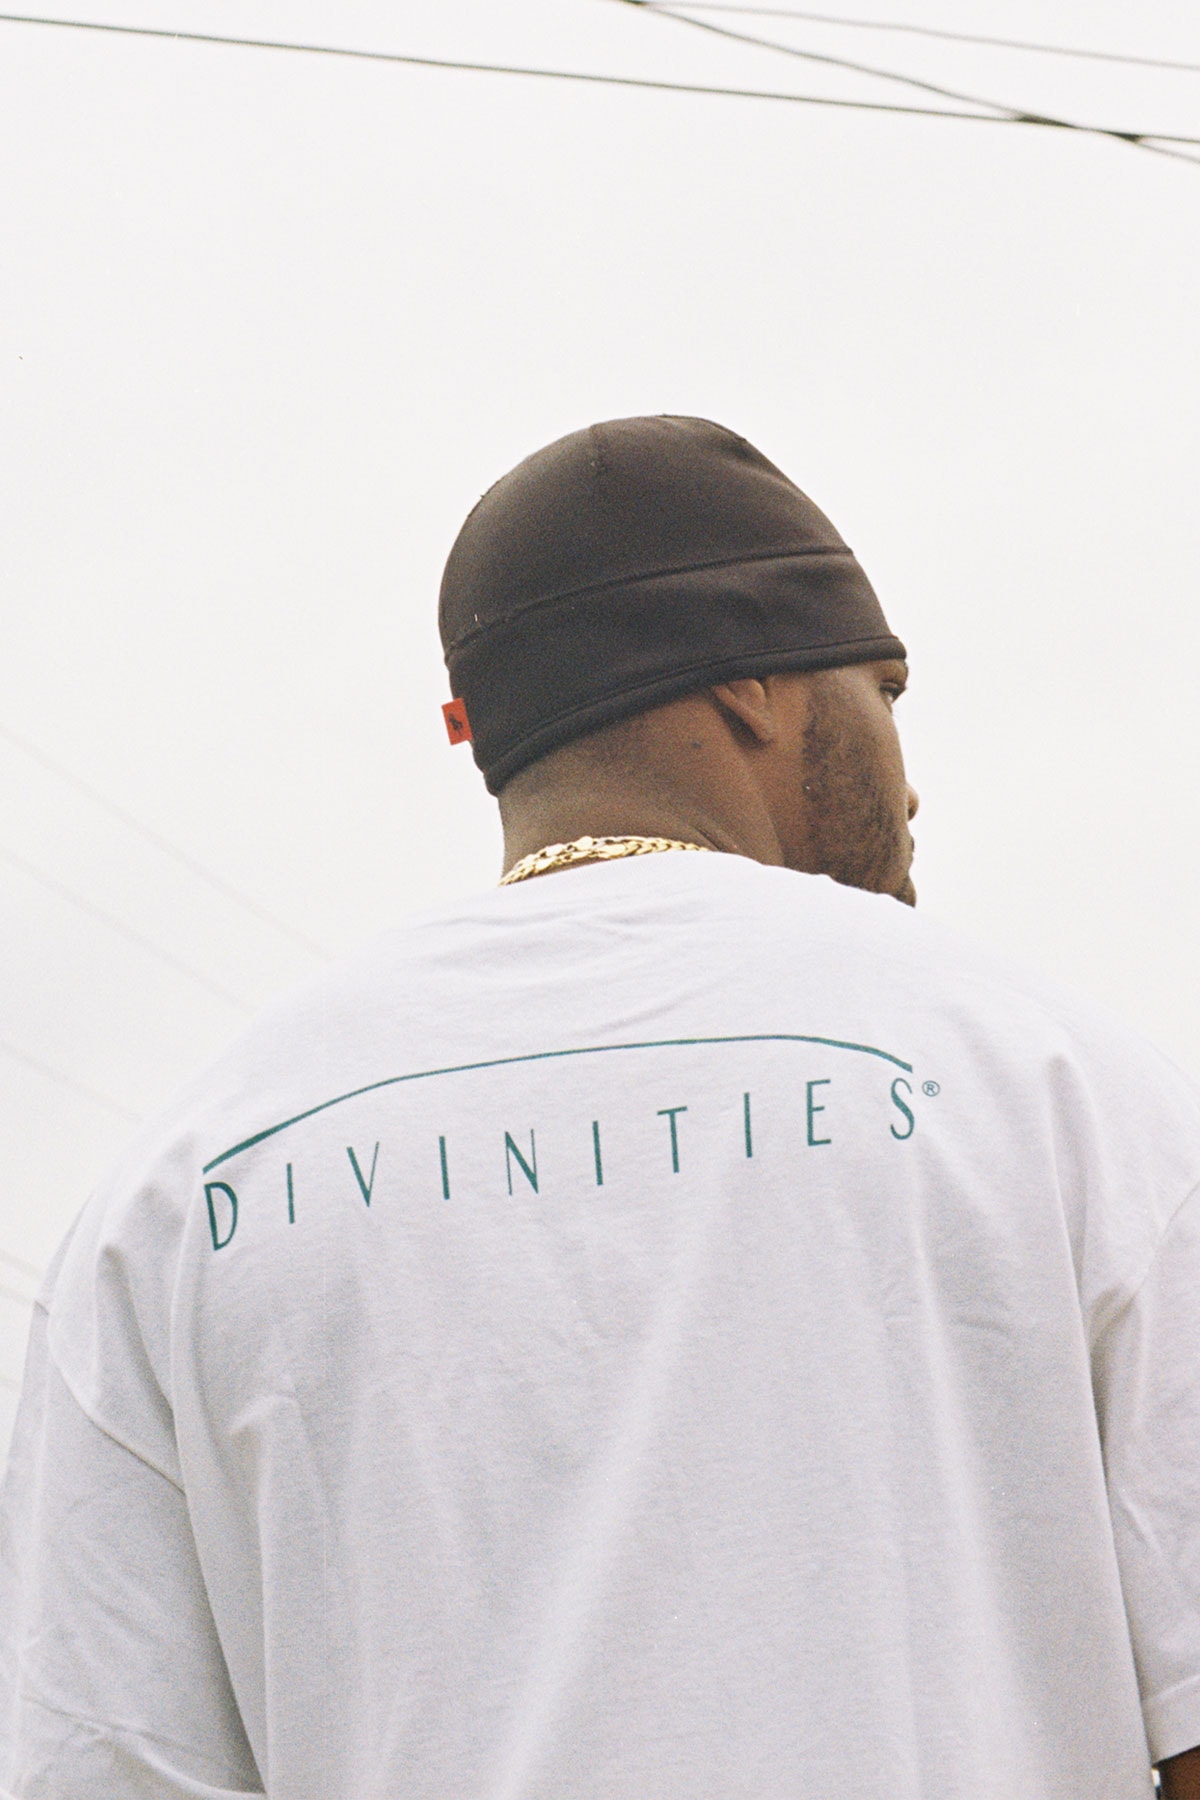 DIVINITIES 2017 Summer Collection Lookbook T-Shirts Hoodies Scantron Chicken and Waffles Lowrider Los Angeles LA